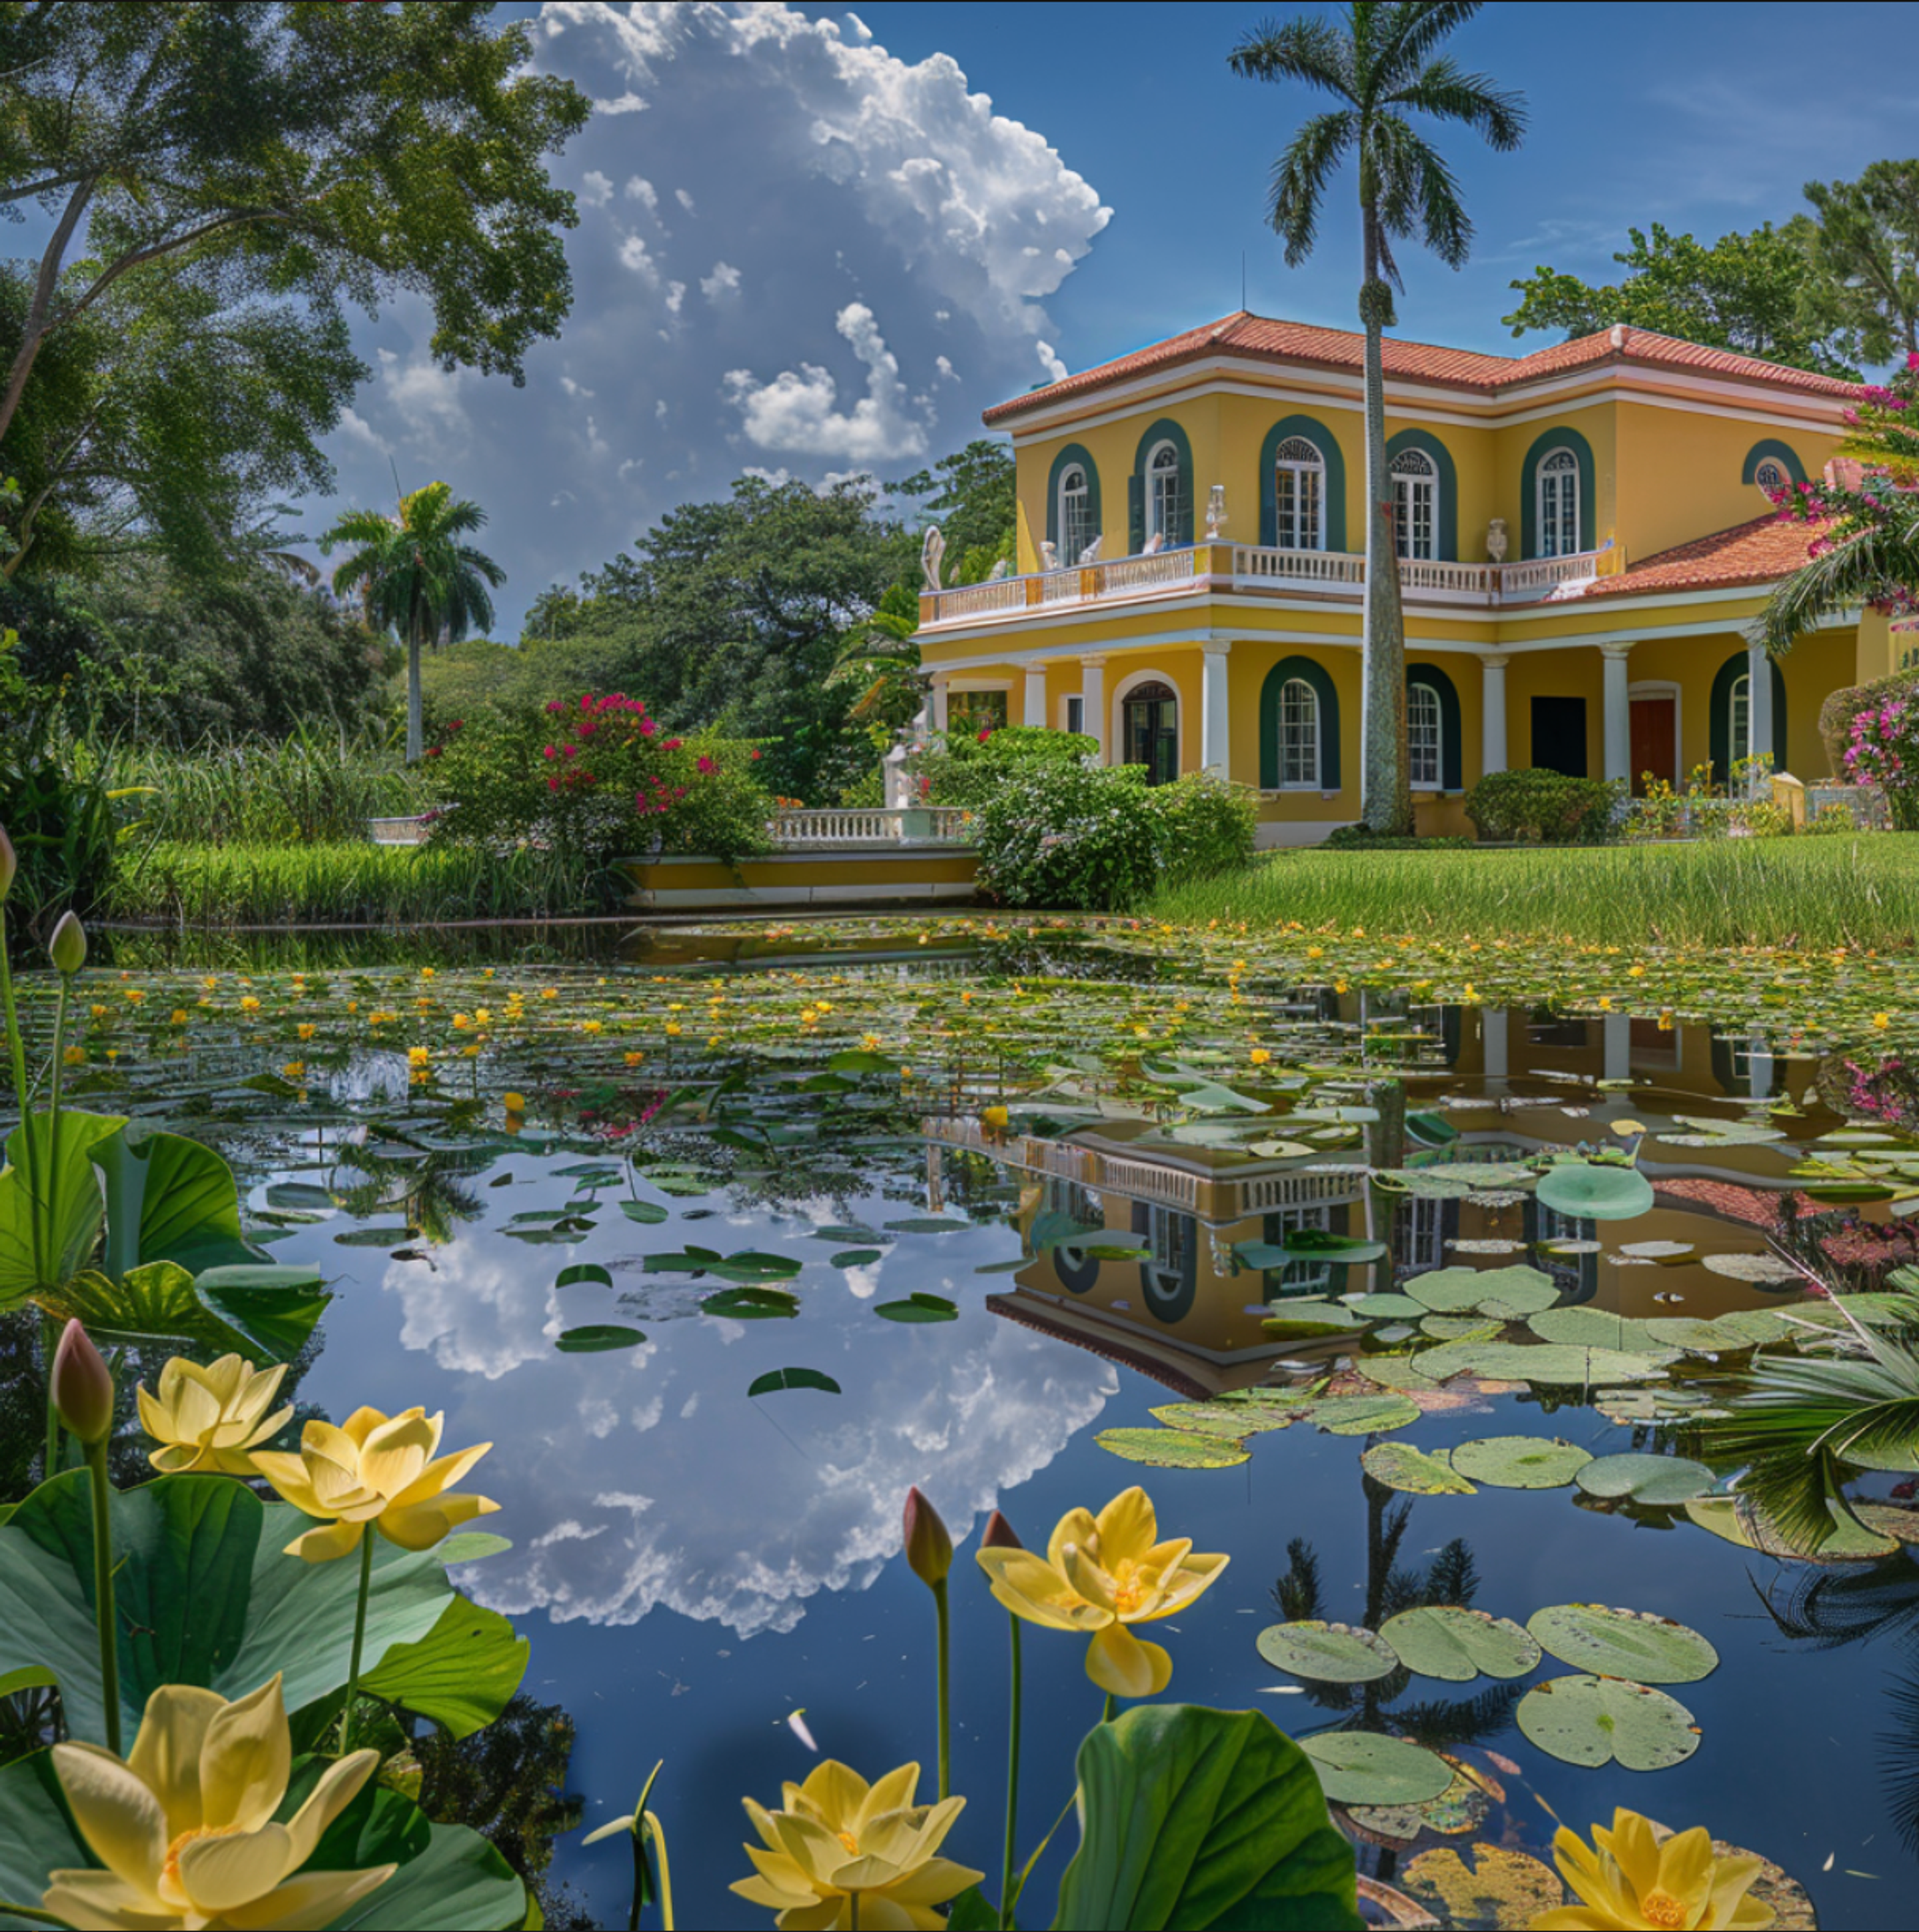 Elegant yellow mansion with stately columns in Homestead, FL, overlooking a tranquil lily-pad adorned pond, with blooming yellow water lilies reflecting the sunlit sky, showcasing the region's picturesque landscapes ideal for local flower delivery.